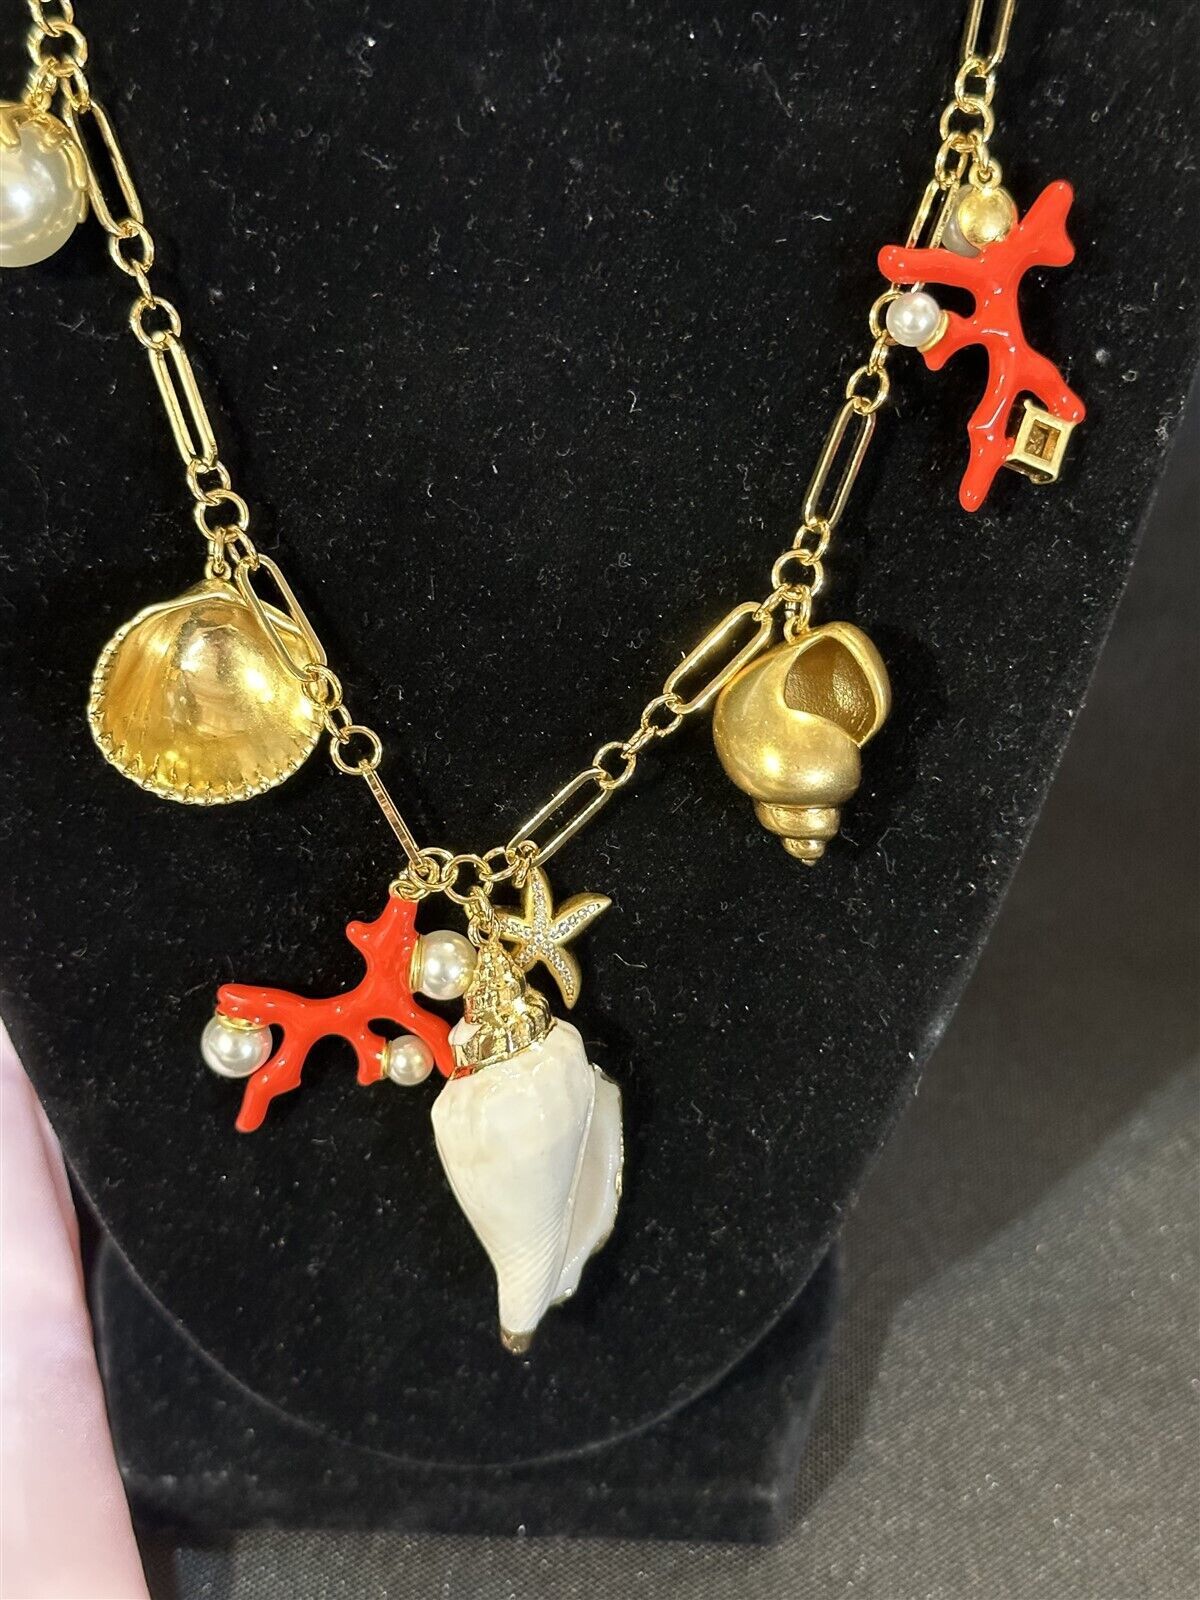 BRAND NEW Kate Spade New York Reef Treasure Charm Necklace Coral Shell Conch - $166.31